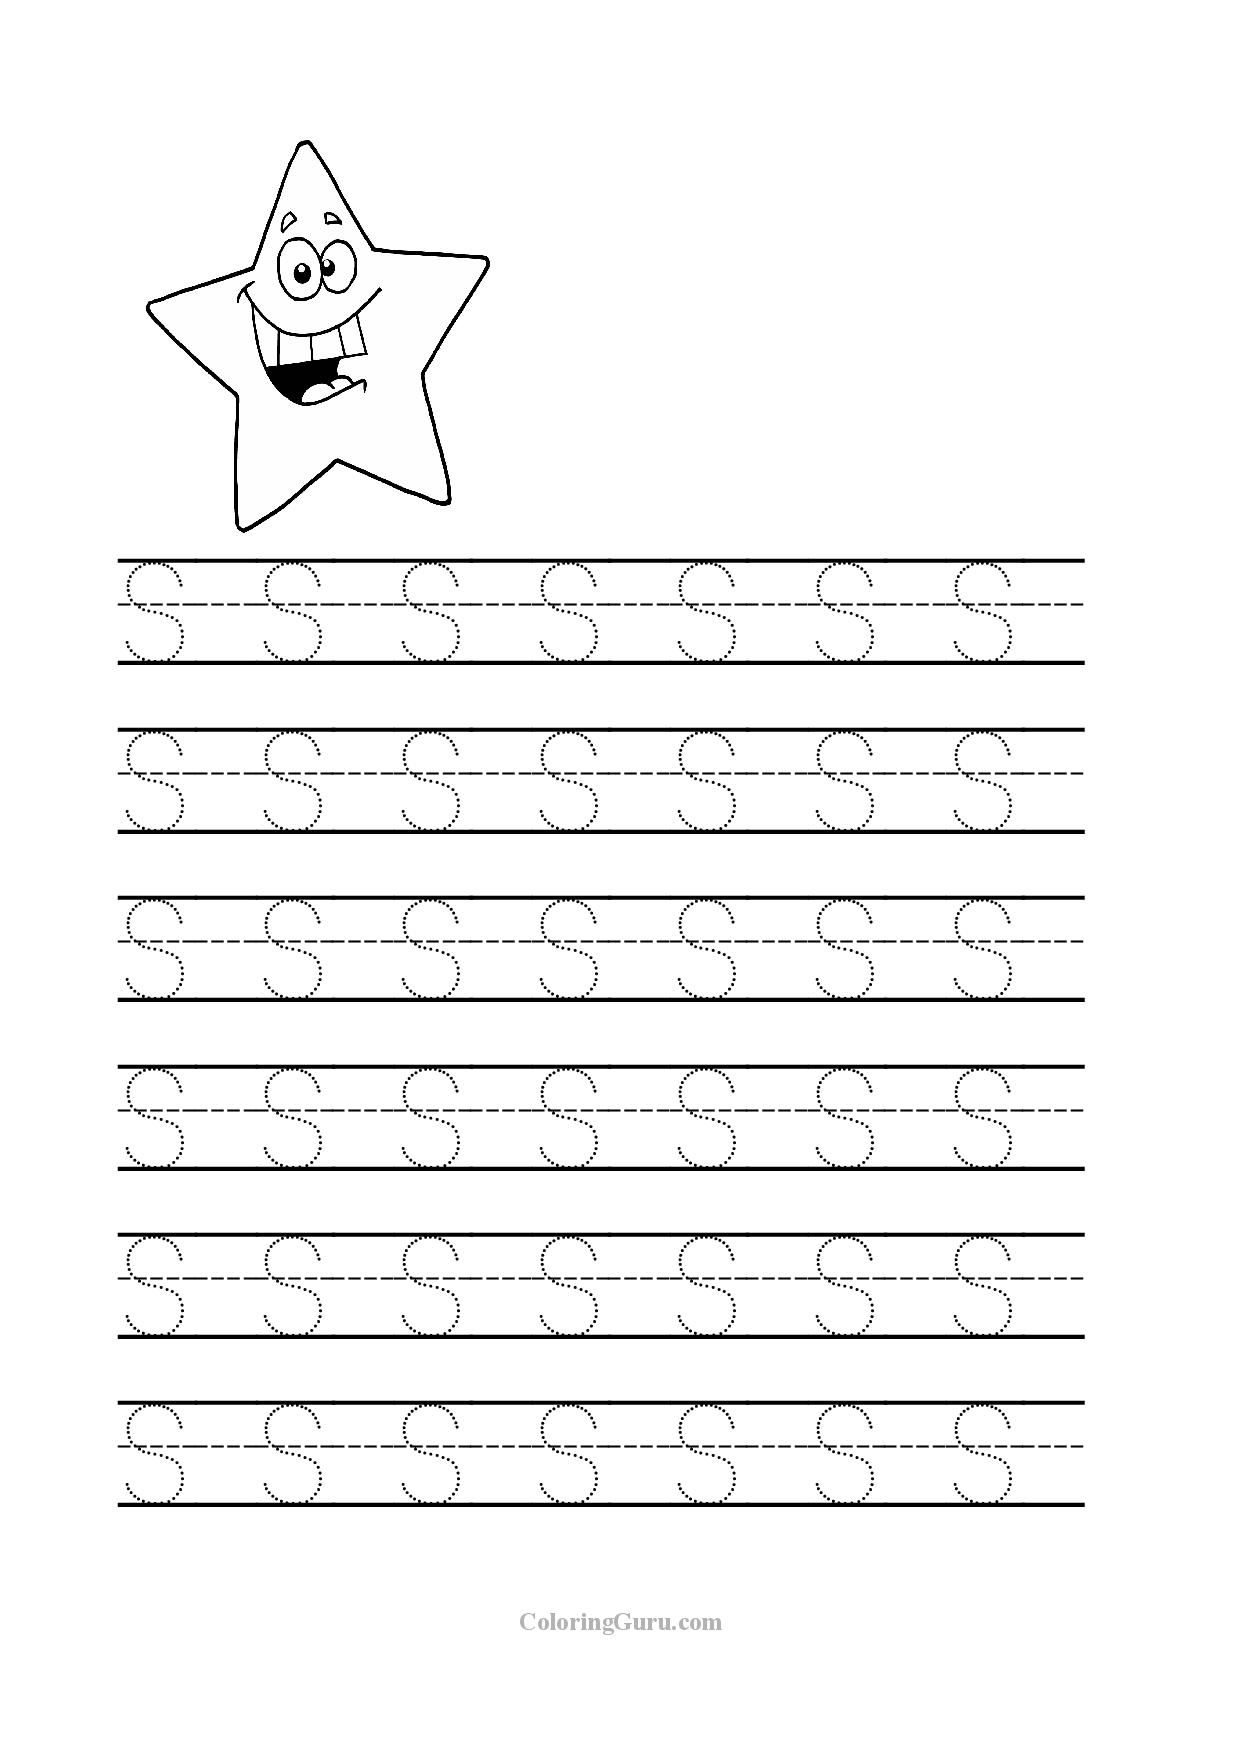 Free Printable Tracing Letter S Worksheets For Preschool intended for Free Printable Tracing Letters